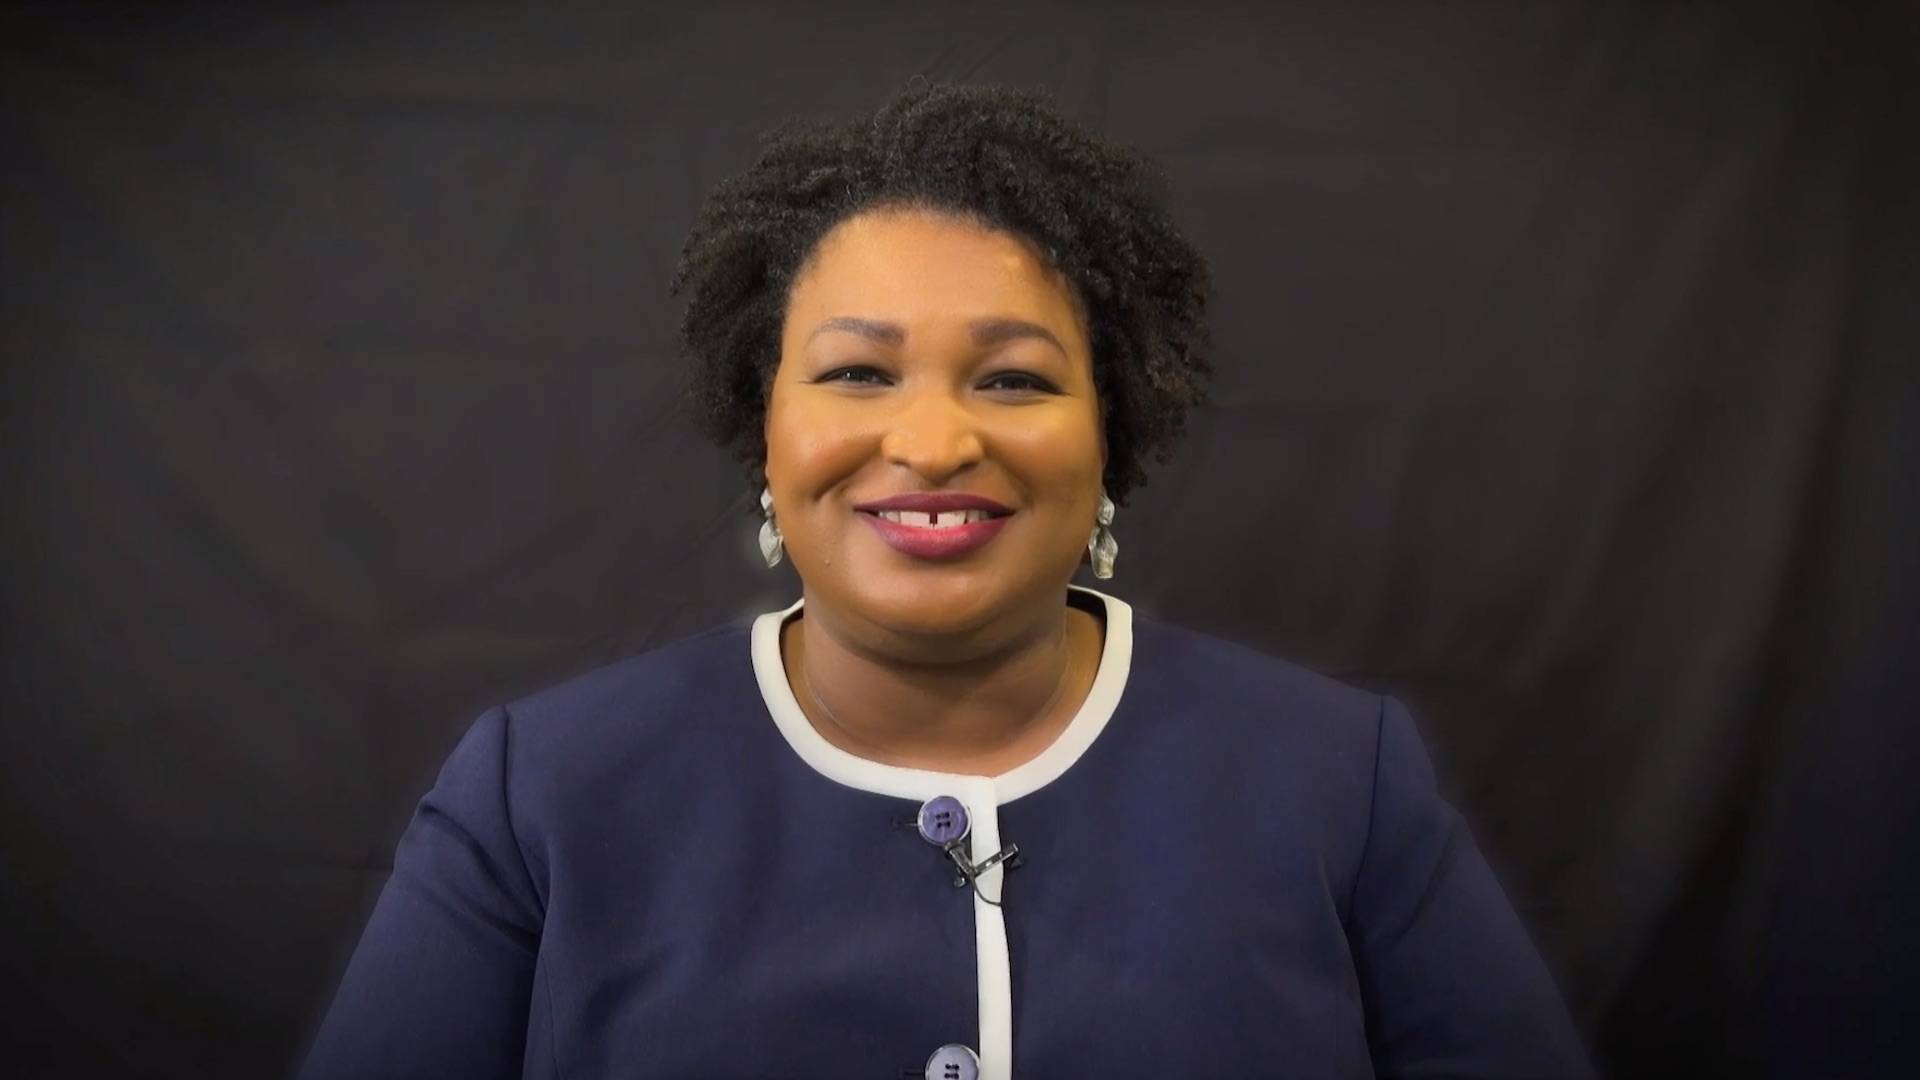 Stacey Abrams on the Phoenix Awards 2021.